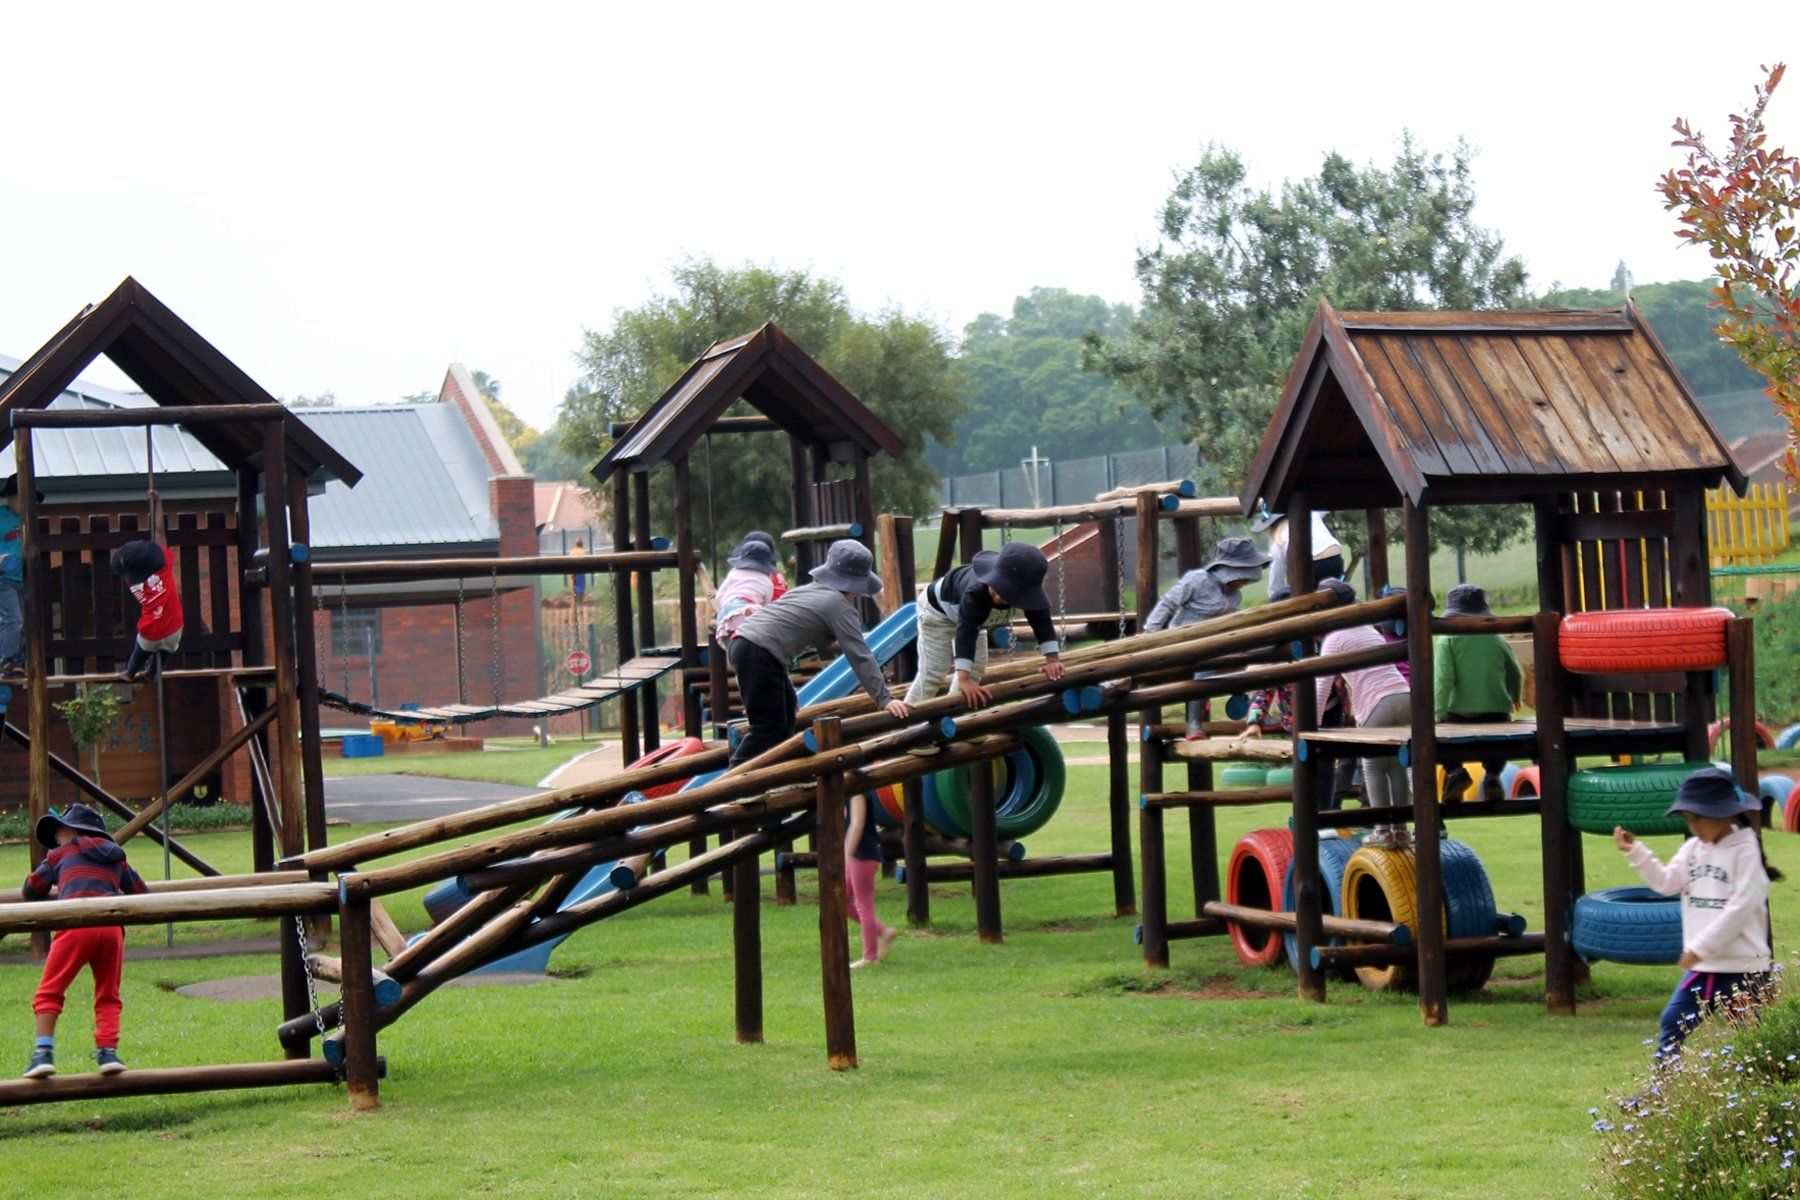 Kids playing on a play ground